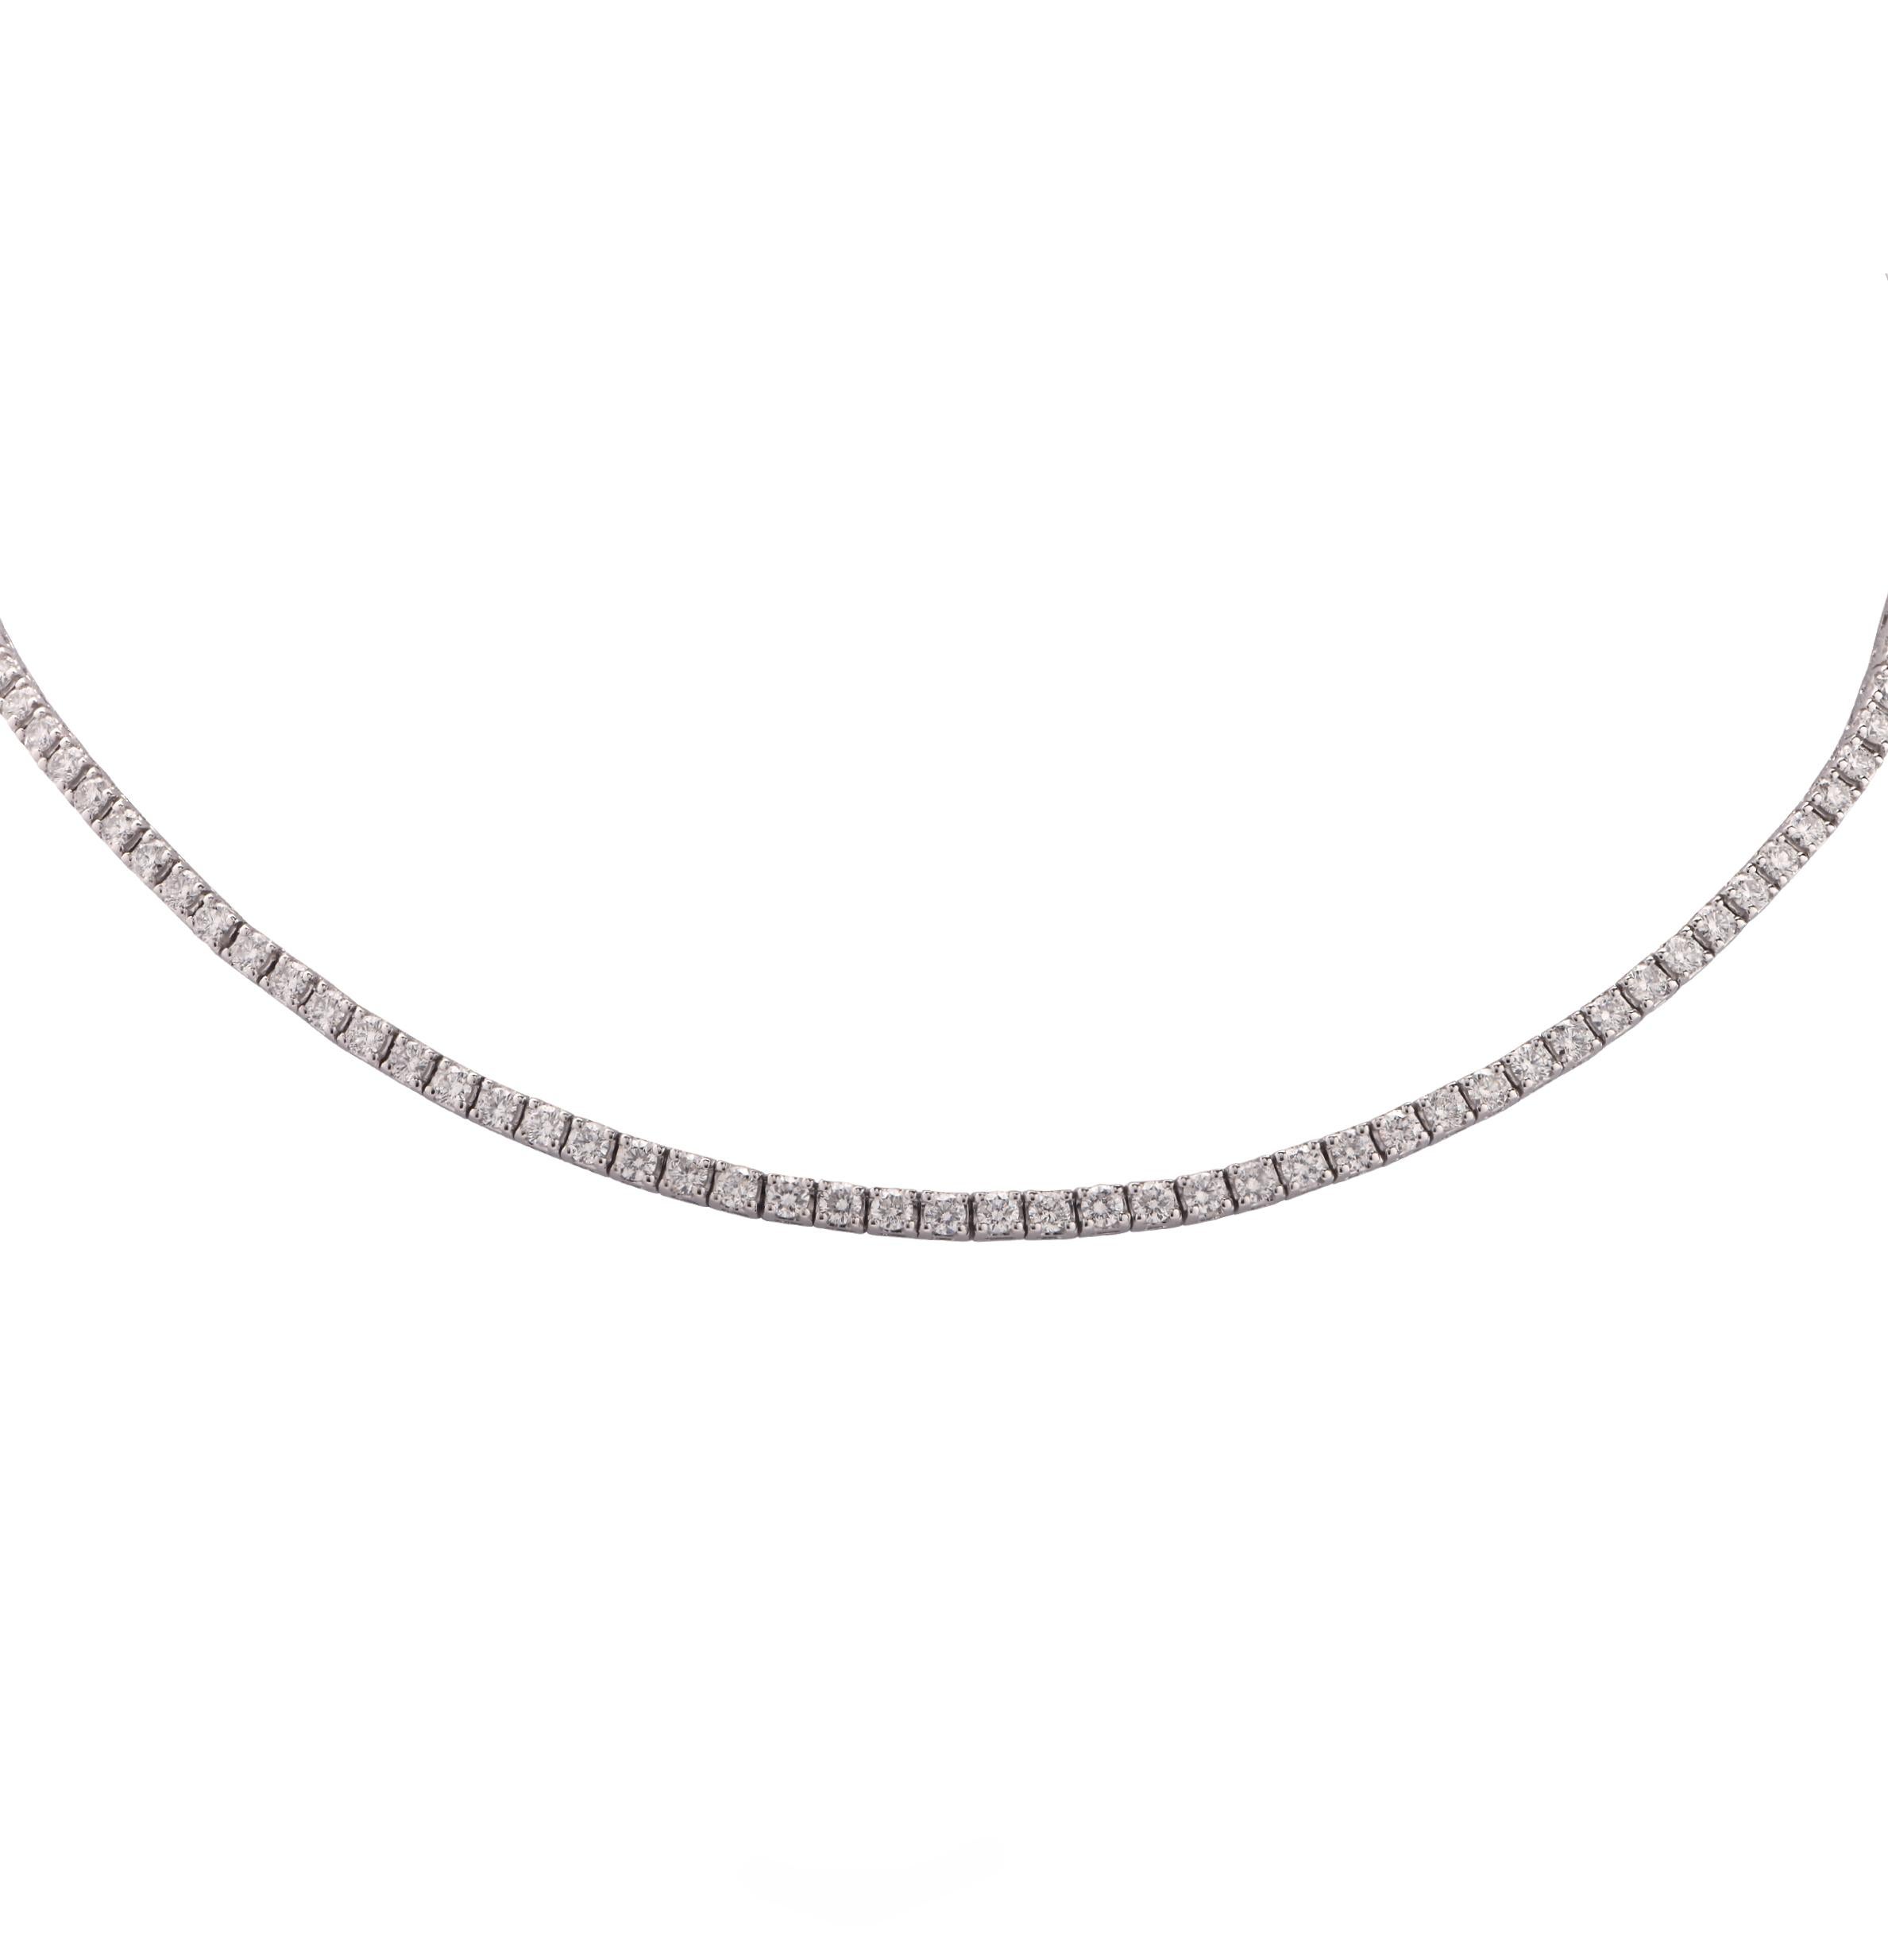 Exquisite diamond necklace crafted in 18 Karat White Gold, showcasing 140 round brilliant cut diamonds weighing 7.15 carats, F-G color, SI1-2 Clarity. The diamonds are set in a seamless sea of eternity, creating a spectacular symphony of brilliance